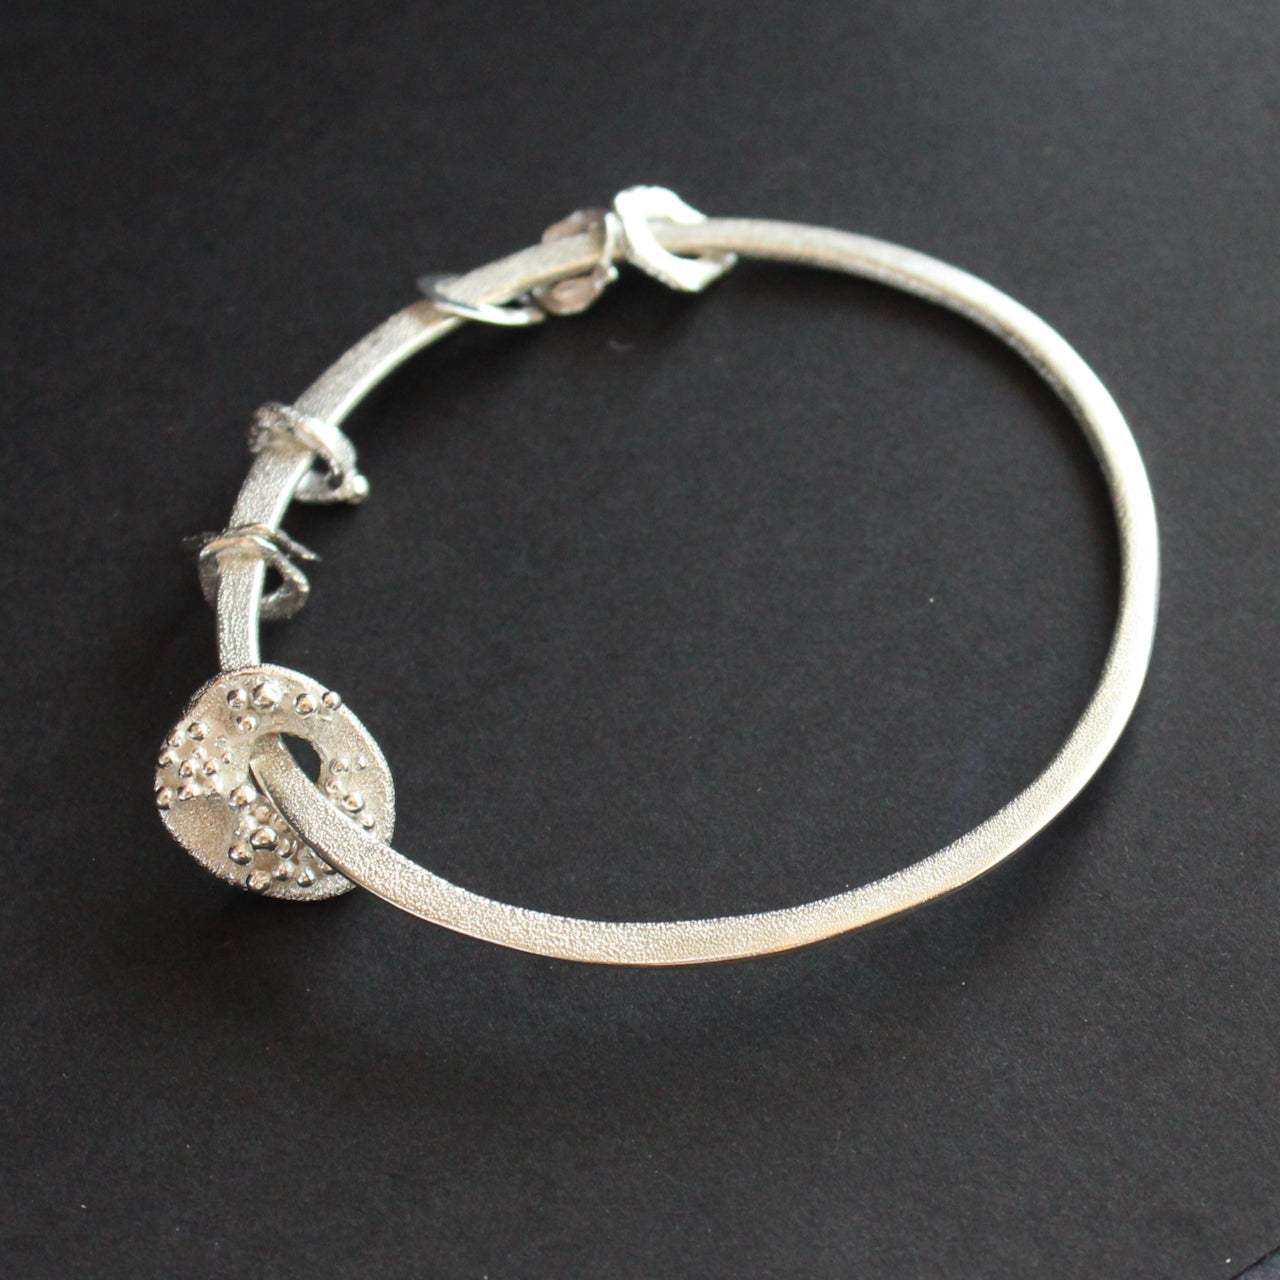 Silver bangle with silver discs of varying sizes on bangle by UK artist Claire Stockings Baker.